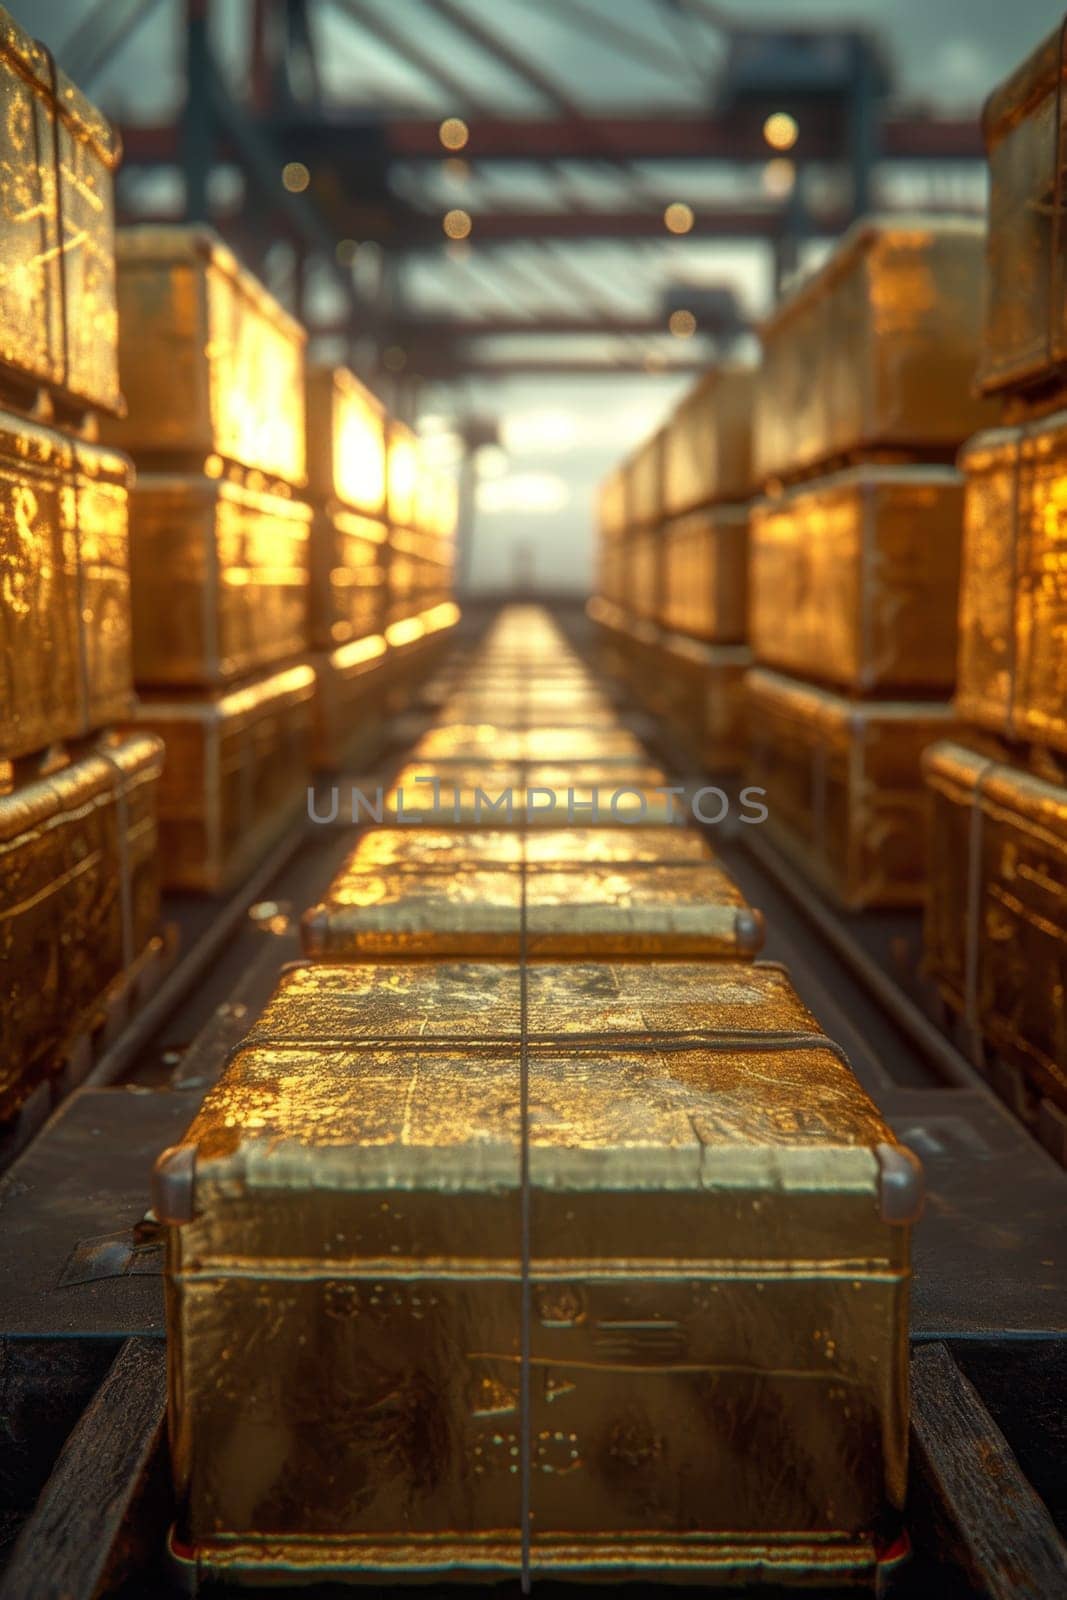 Gold containers with cargo in the port before shipment.